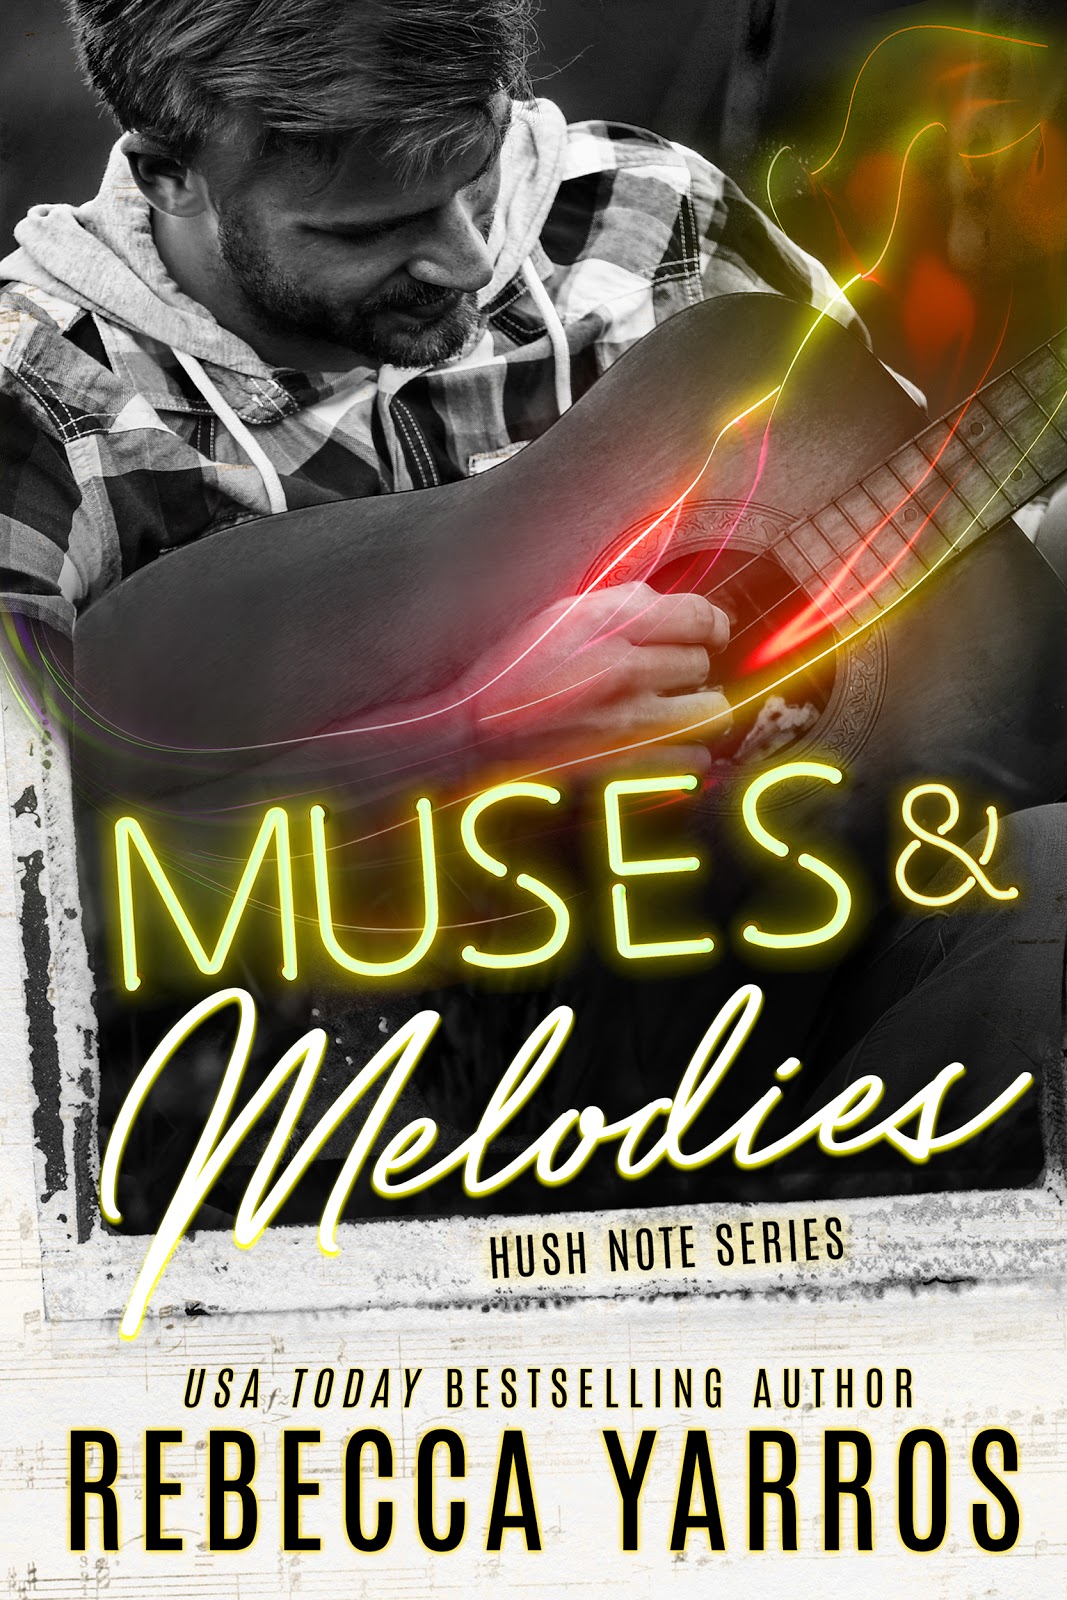 Muses & Melodies by #RebeccaYarros [Release Blitz]